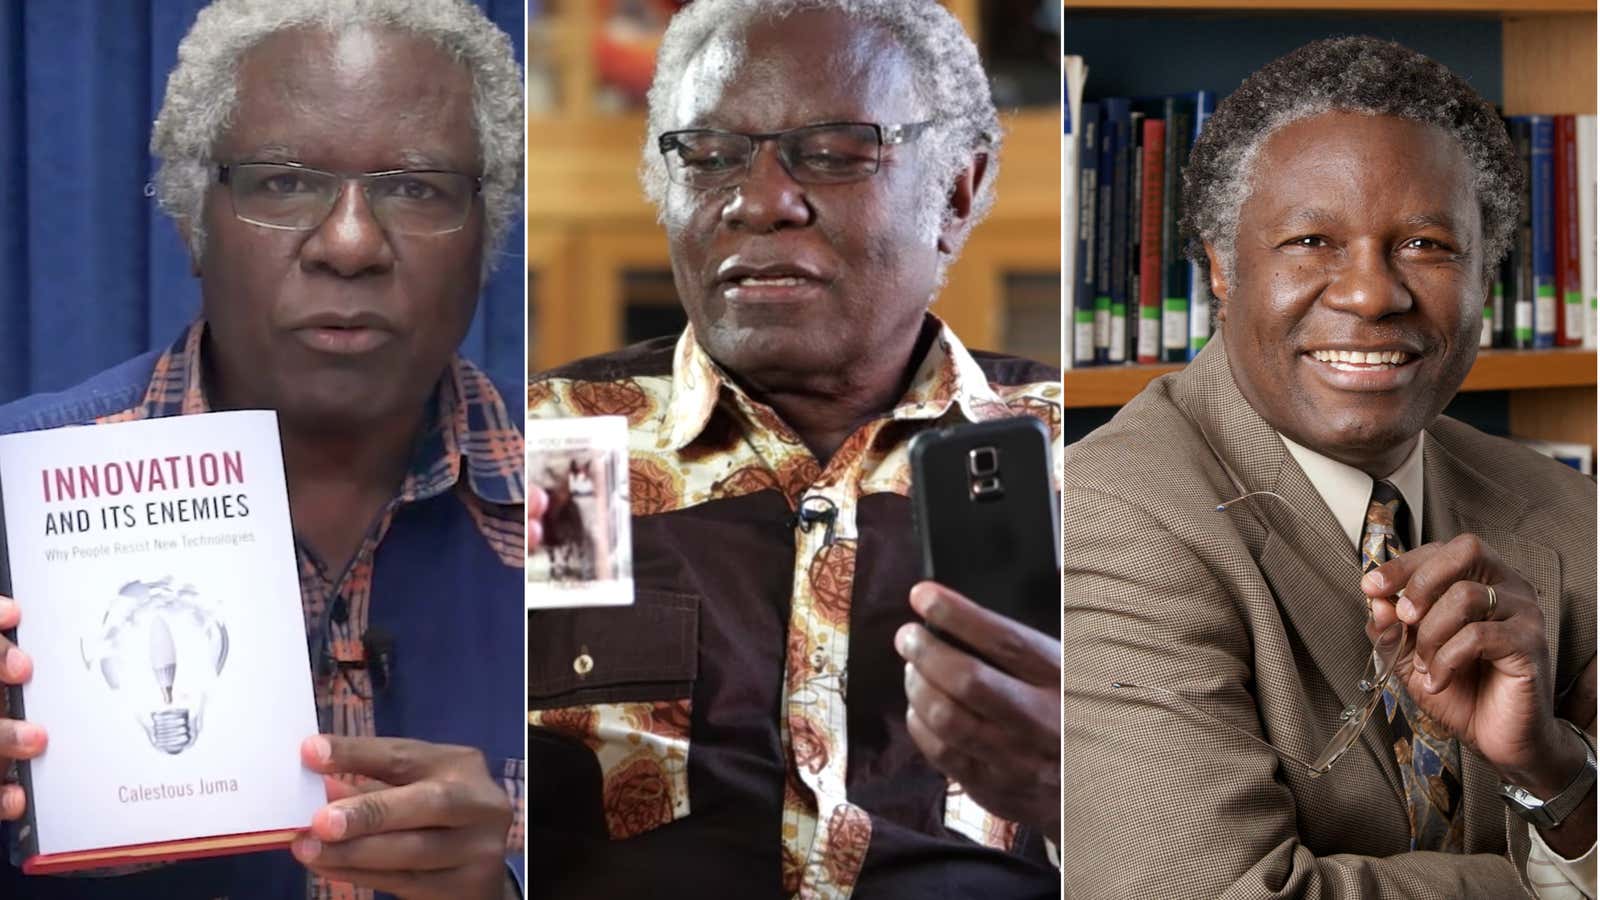 Calestous: Passionate about innovation